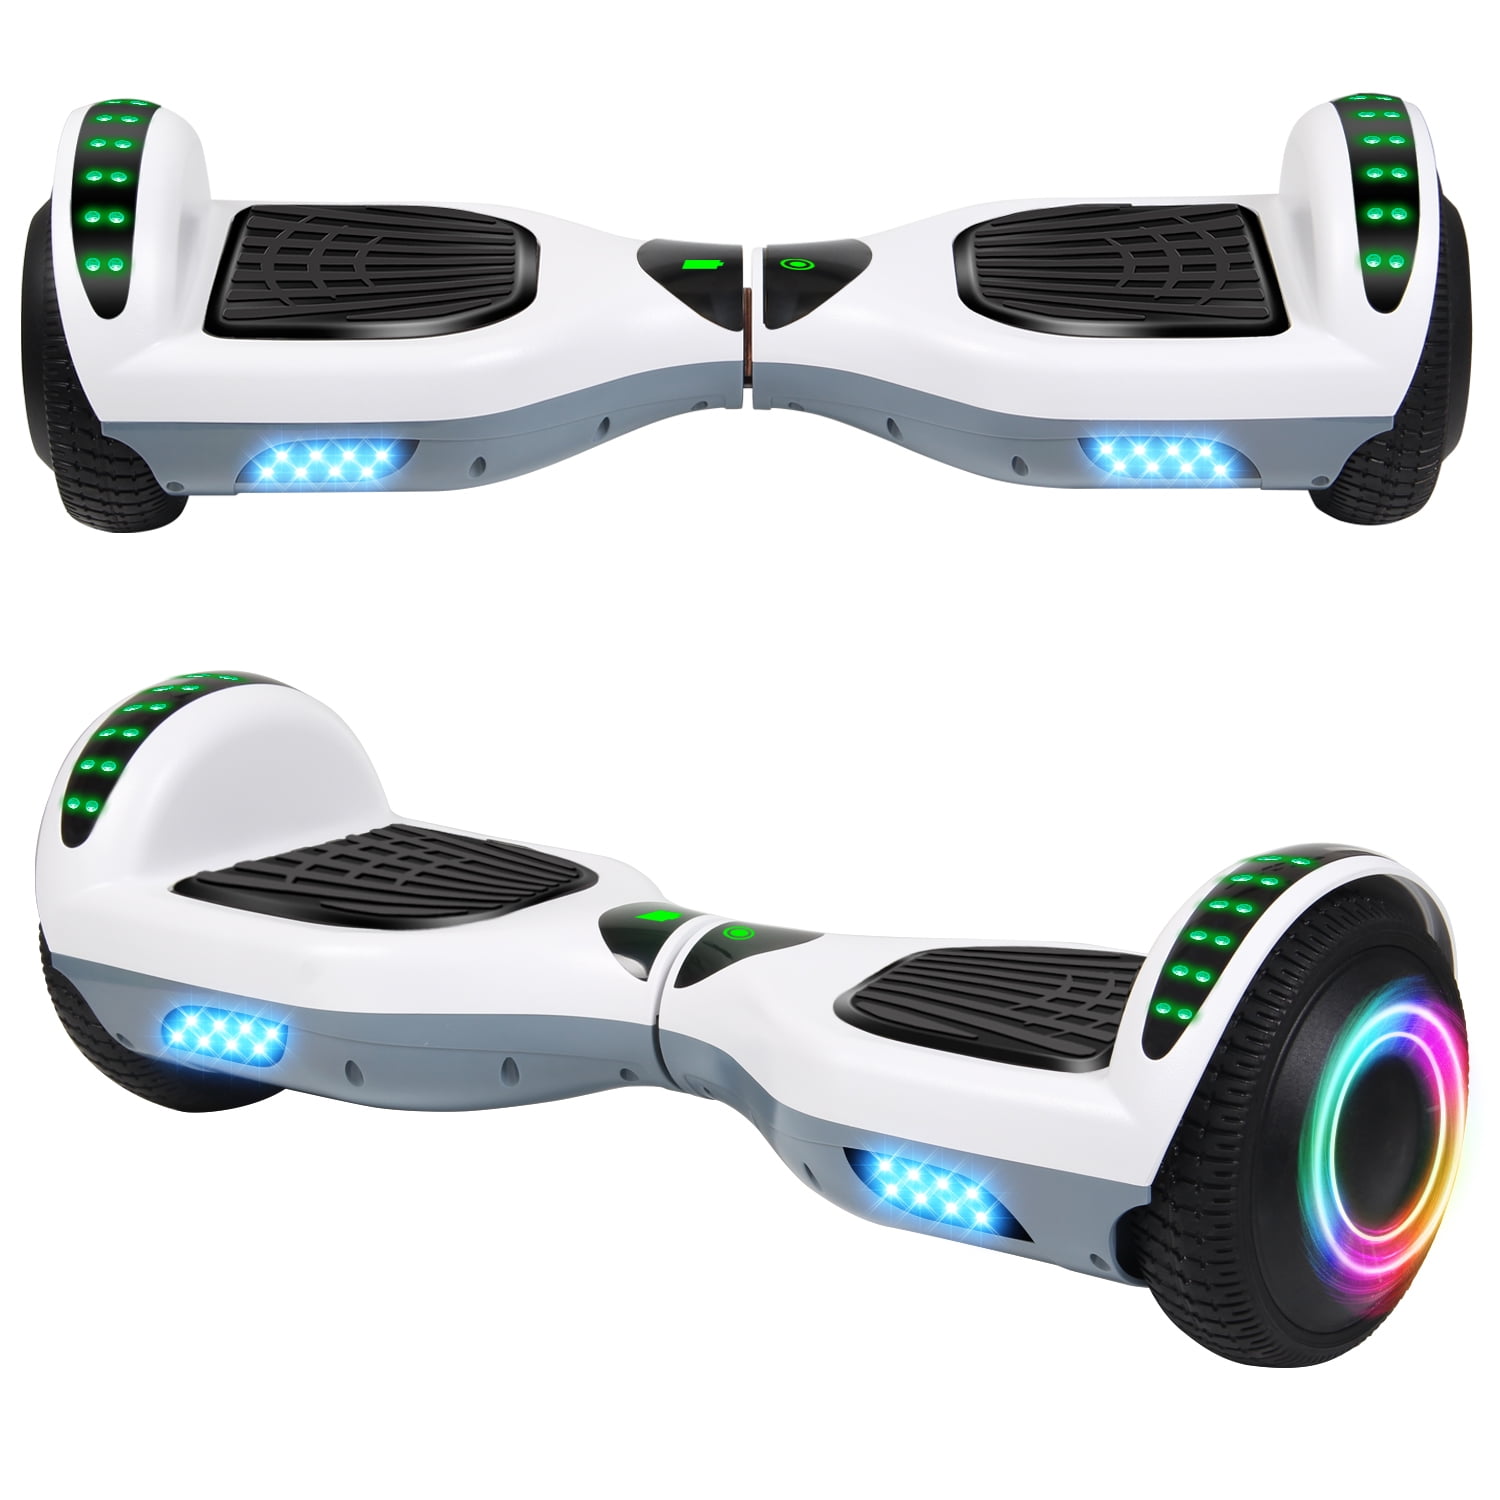 SISIGAD Hoverboard Self Balancing Scooter 6.5 Two-Wheel Self Balancing Hoverboard with Bluetooth Speaker and LED Lights Electric Scooter for Adult Kids Gift UL 2272 Certified Fun Edition 